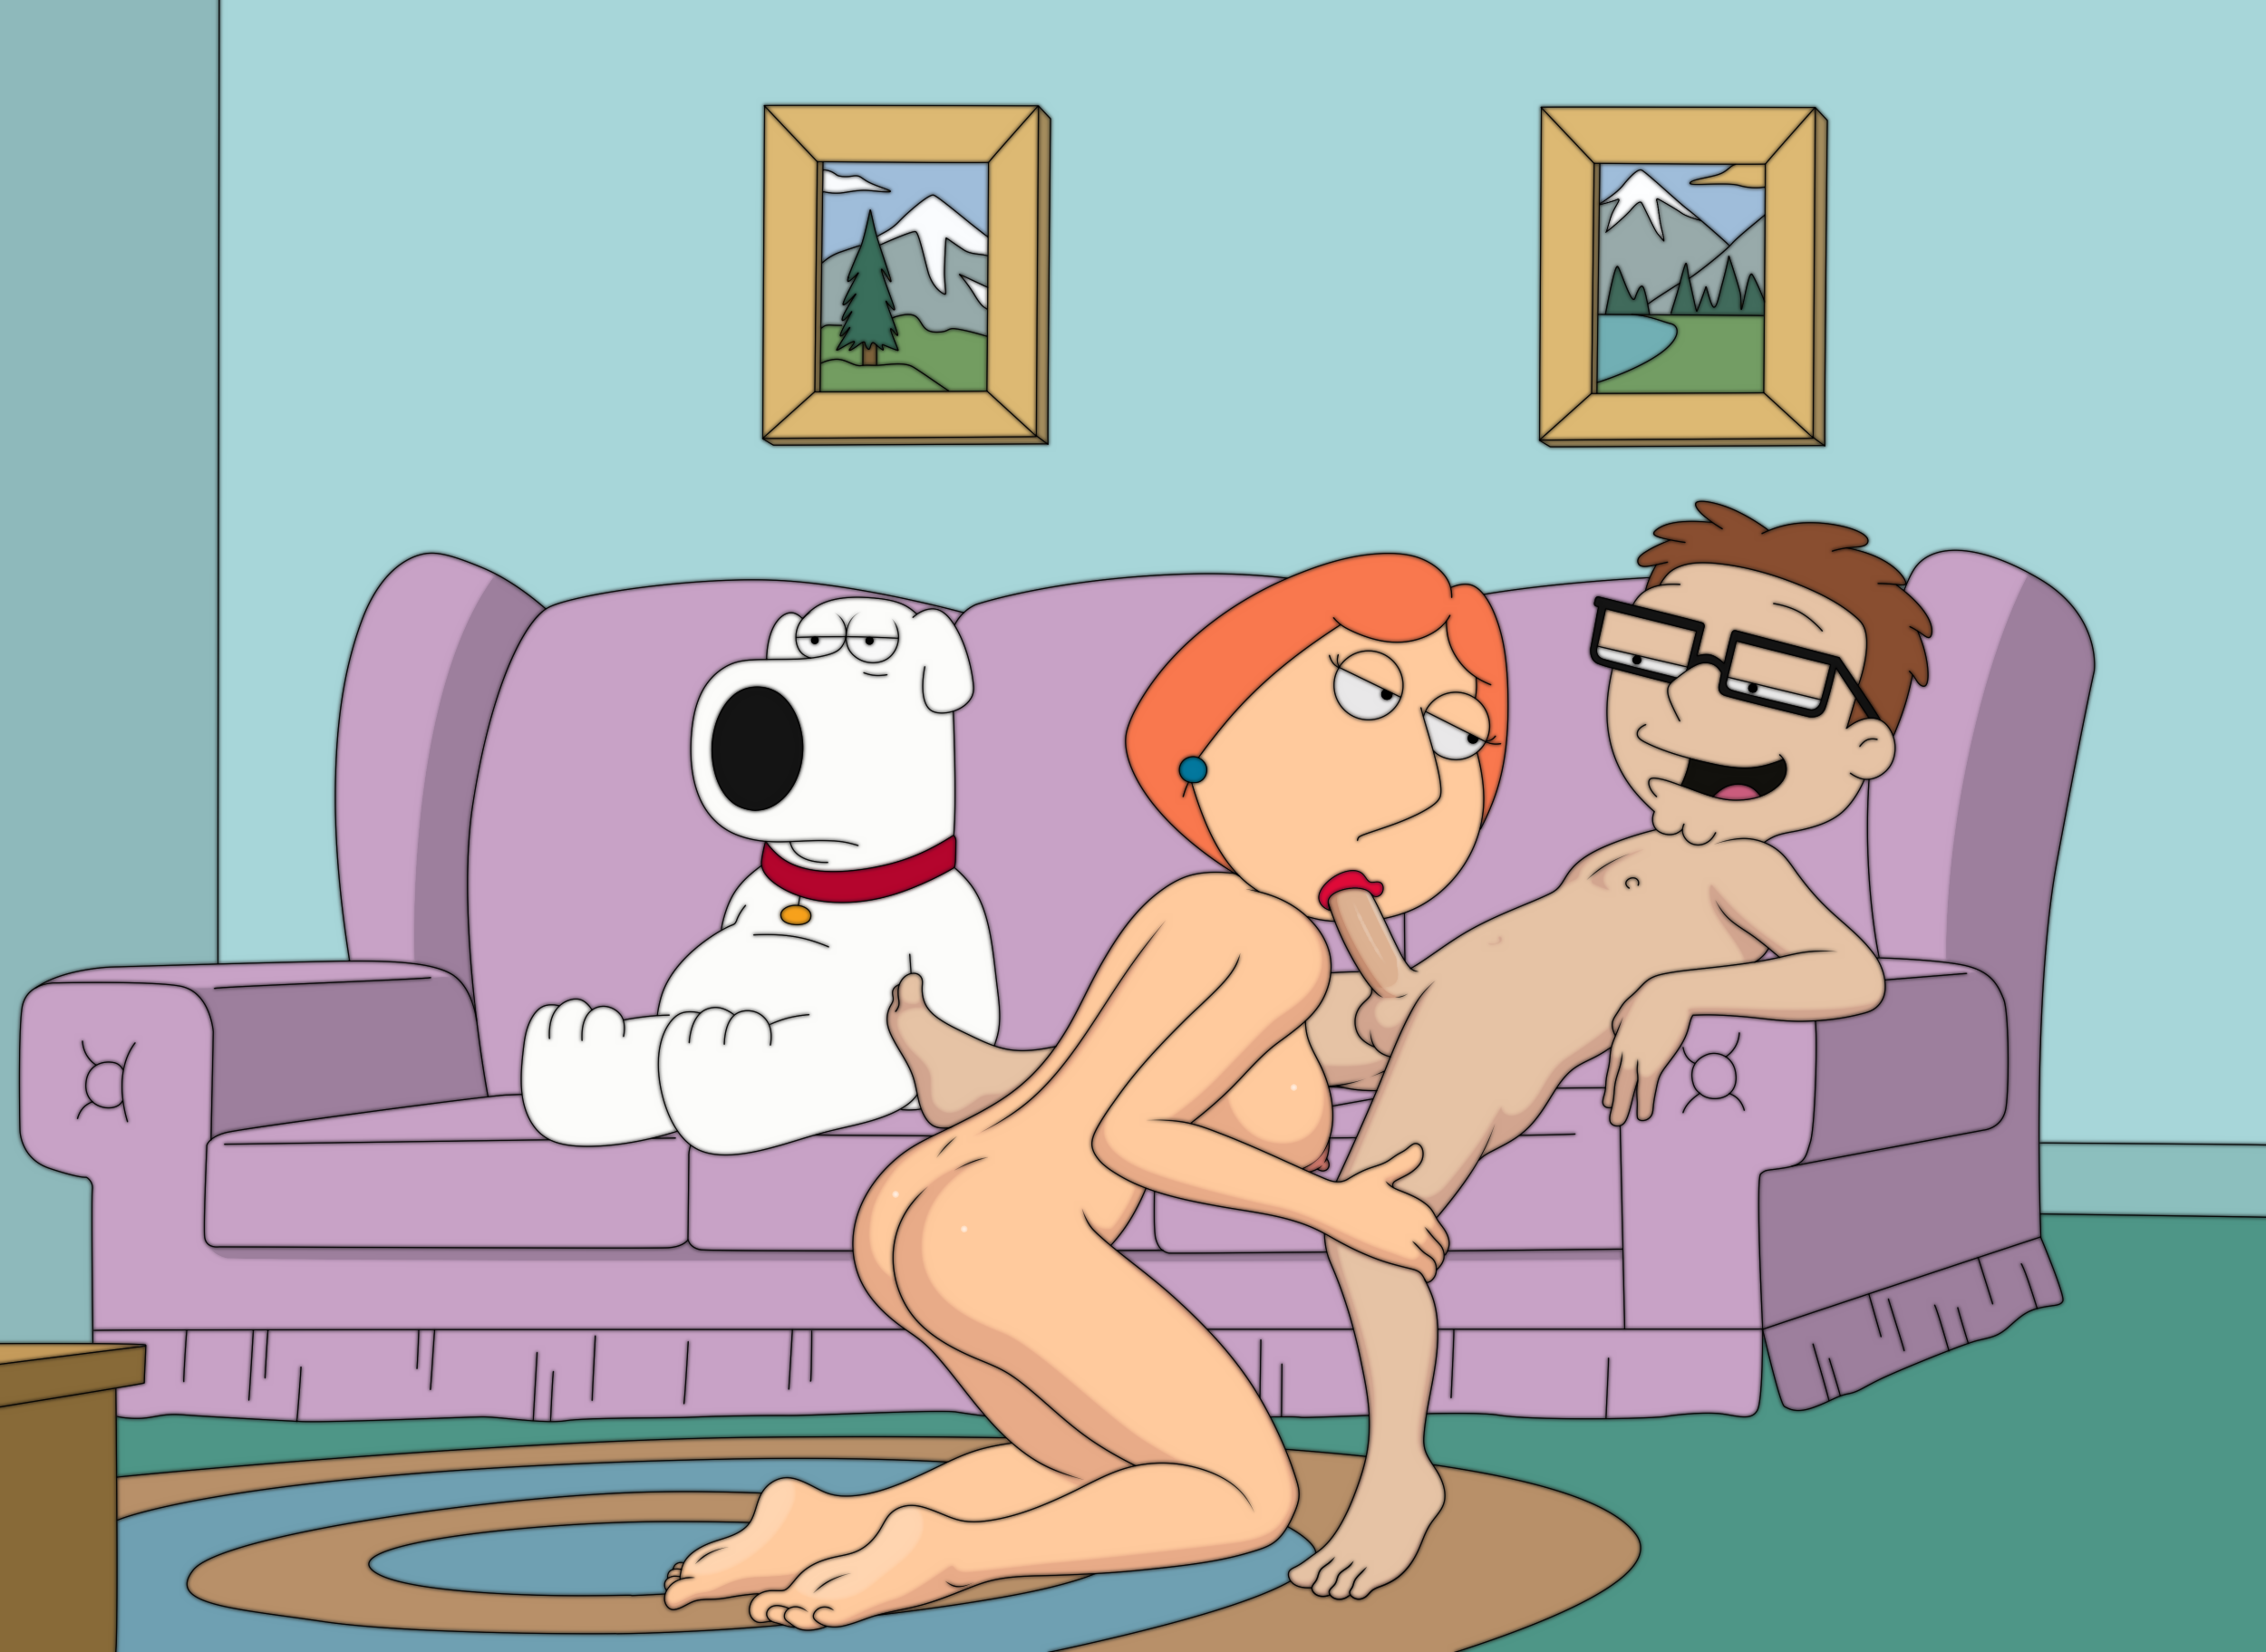 sfan, brian griffin, lois griffin, steve smith, american dad, family guy, c...